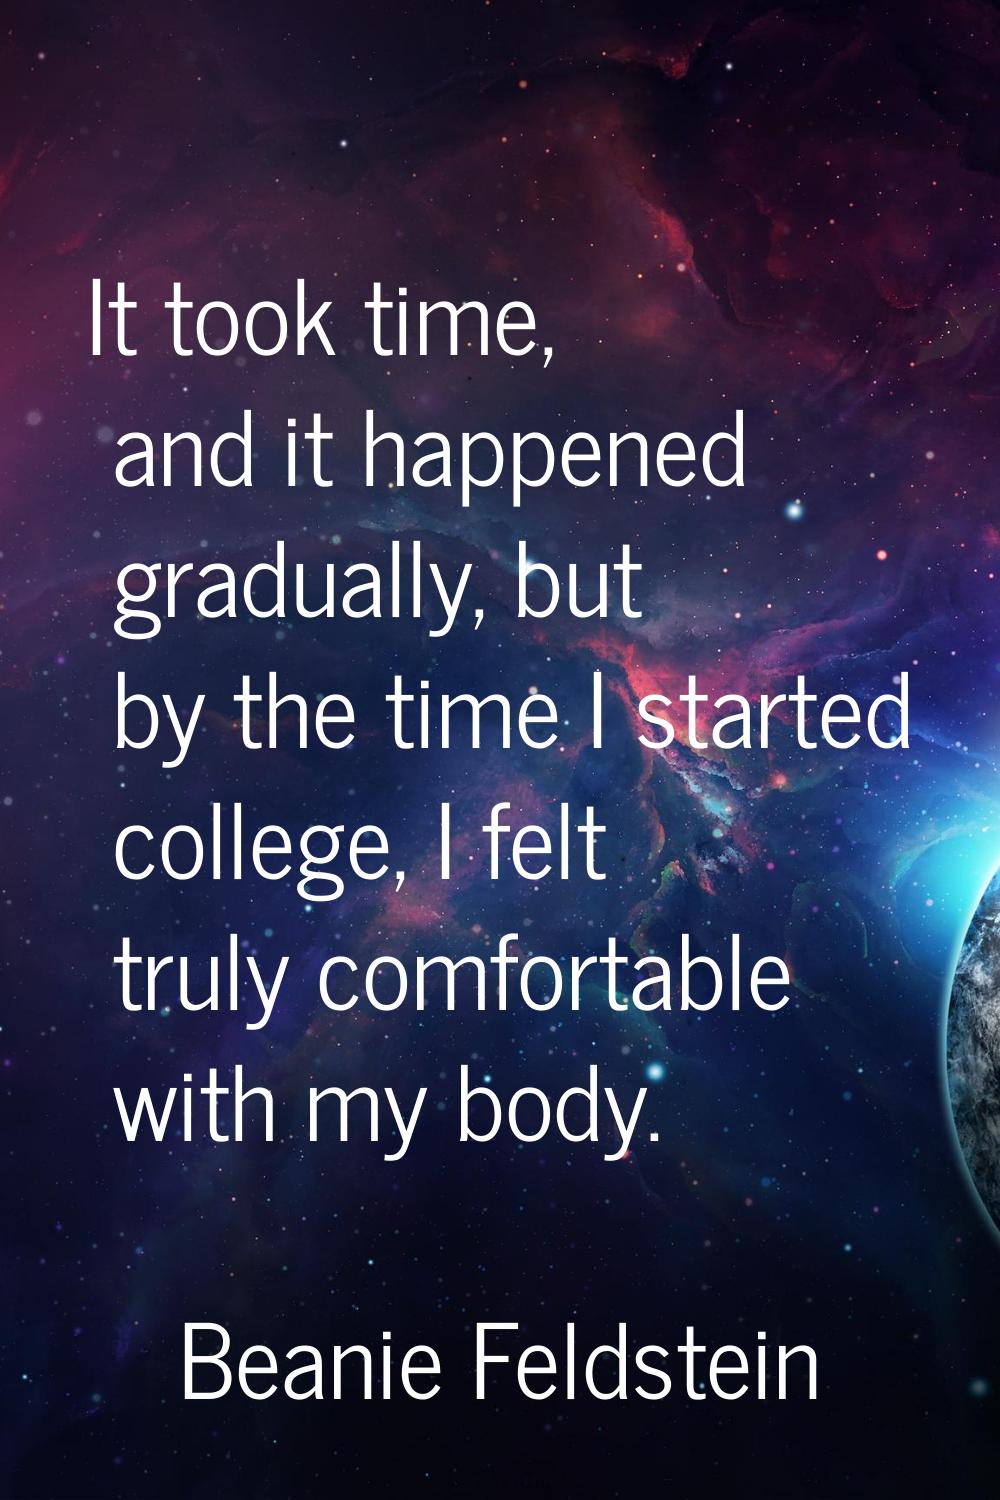 It took time, and it happened gradually, but by the time I started college, I felt truly comfortabl